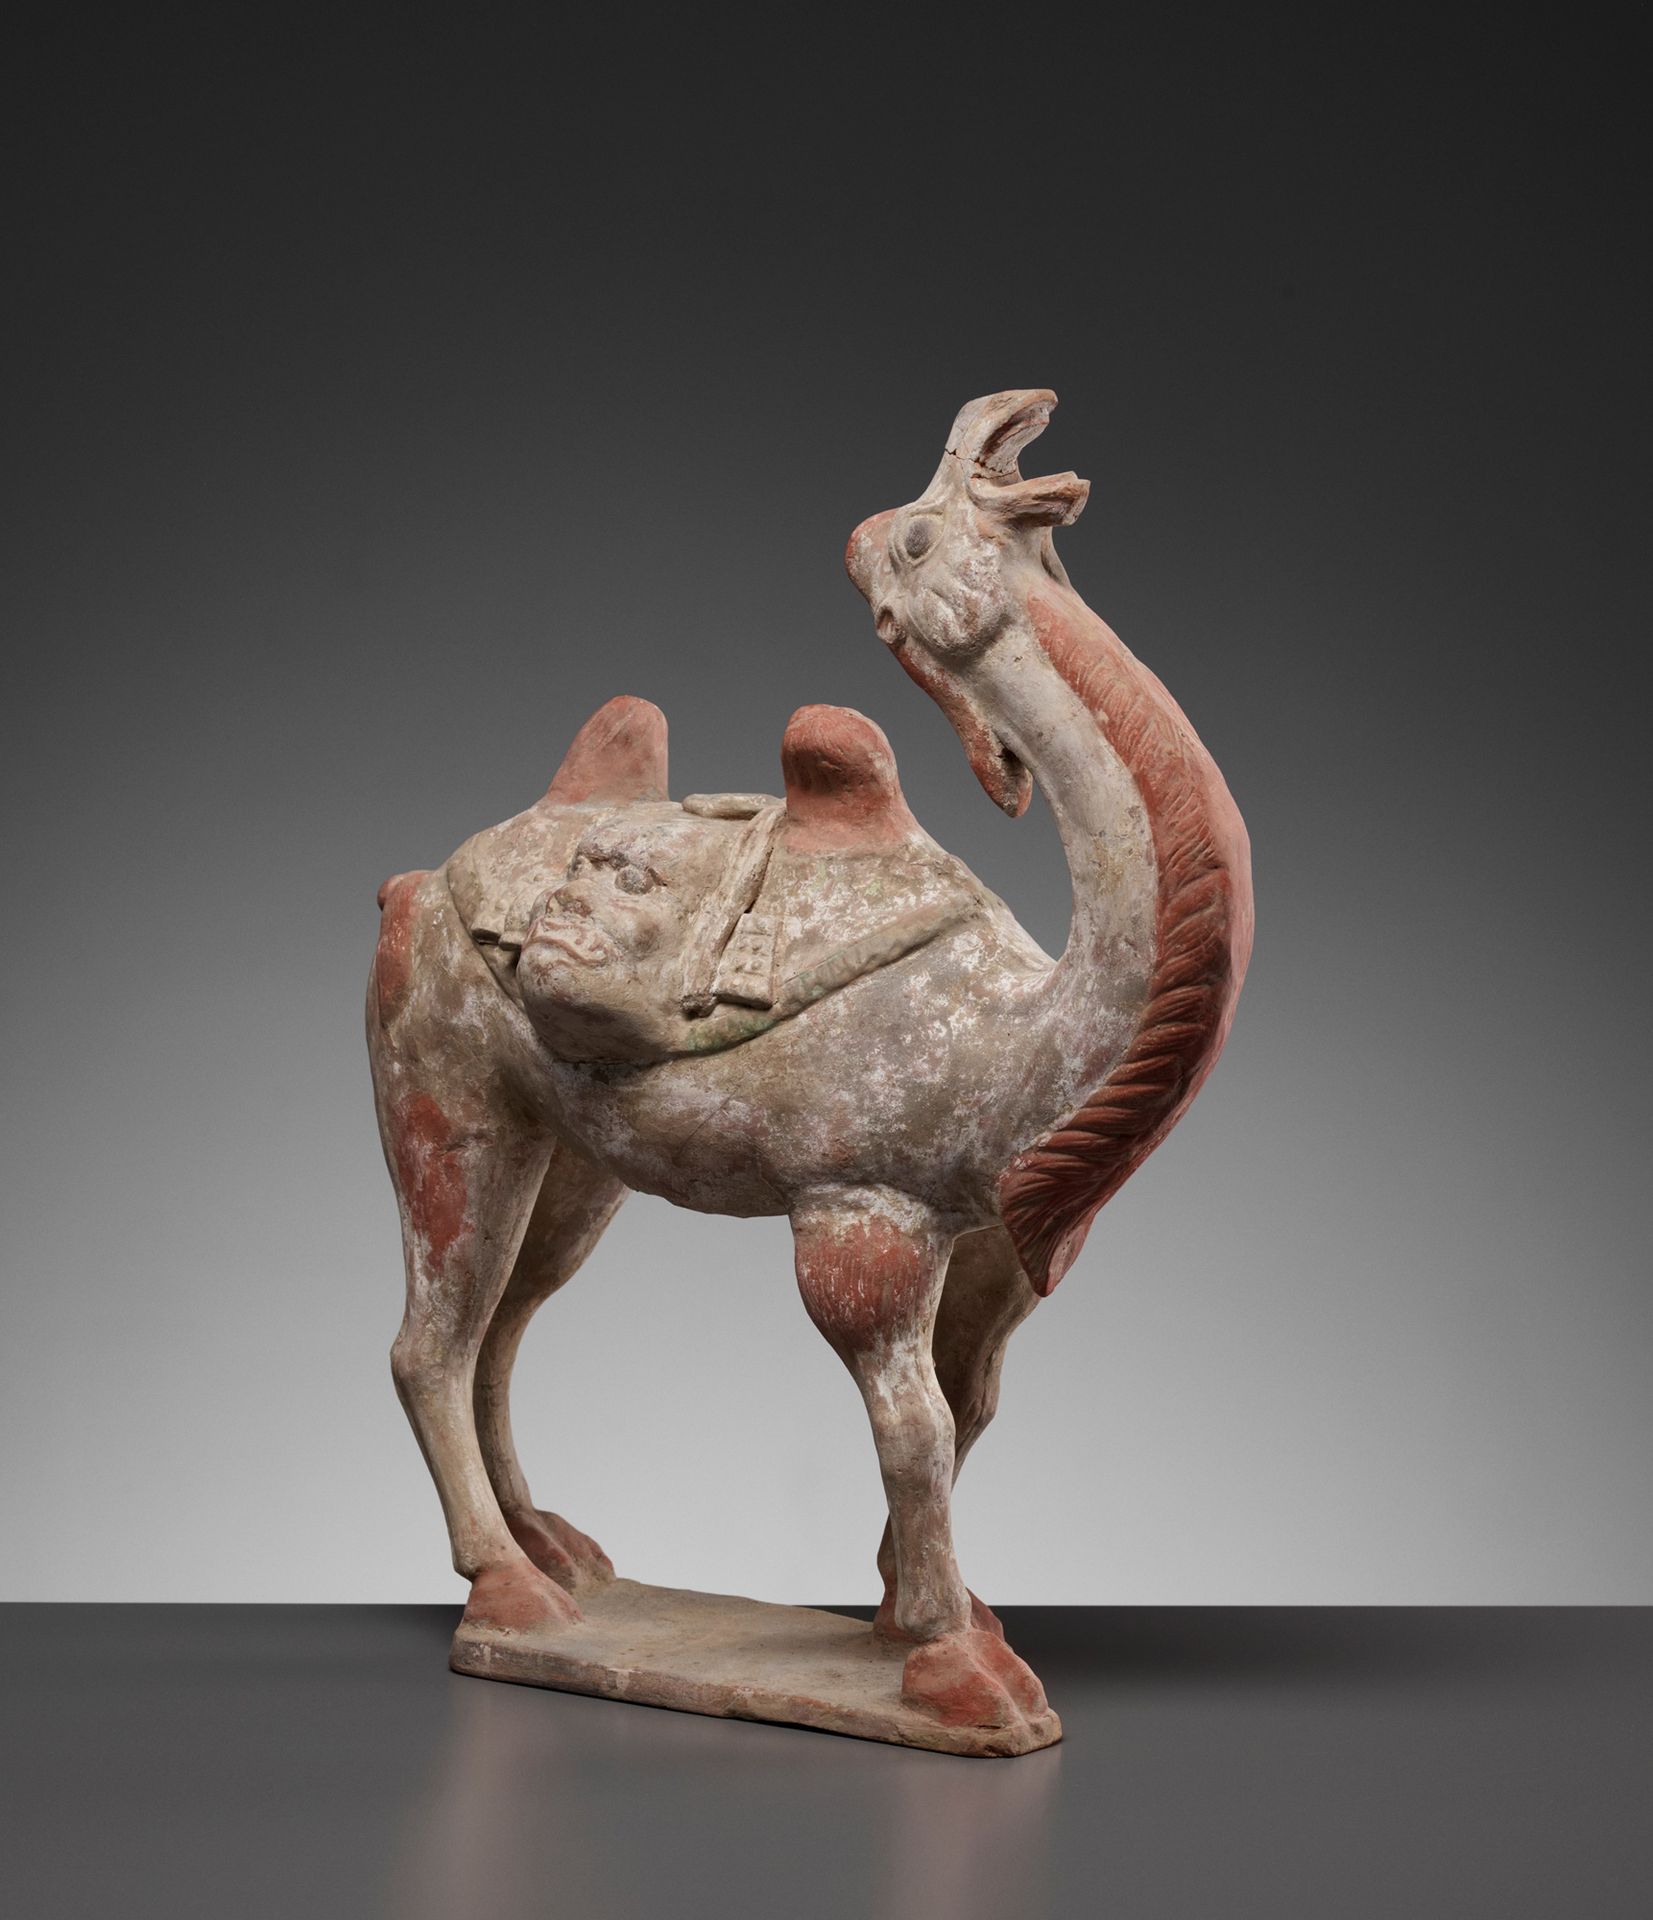 A PAINTED POTTERY FIGURE OF A BACTRIAN CAMEL, TANG DYNASTY 唐代彩绘骆驼图，
中国，618-907。骆&hellip;